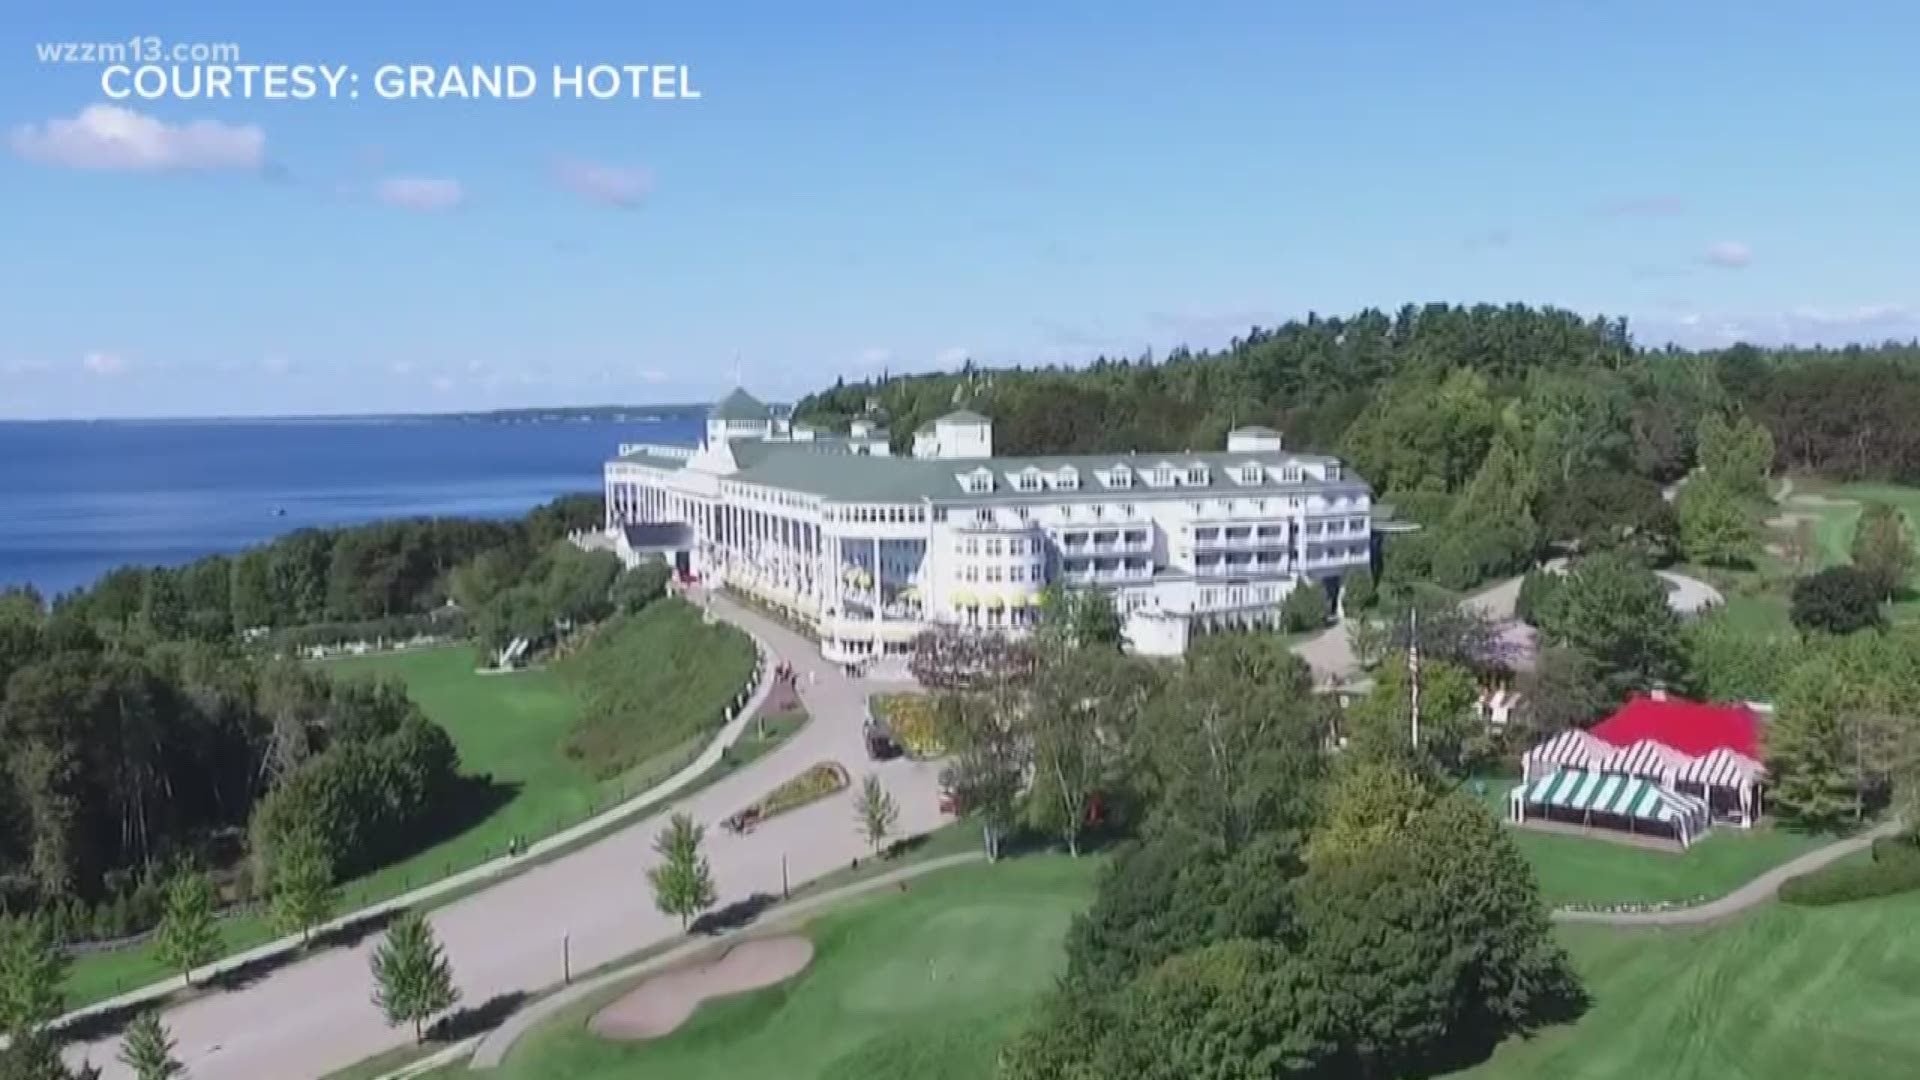 It's one of Michigan's most recognizable landmarks and now, the Grand Hotel on Mackinac Island may be considered as a possible site of next year's G7 Summit.